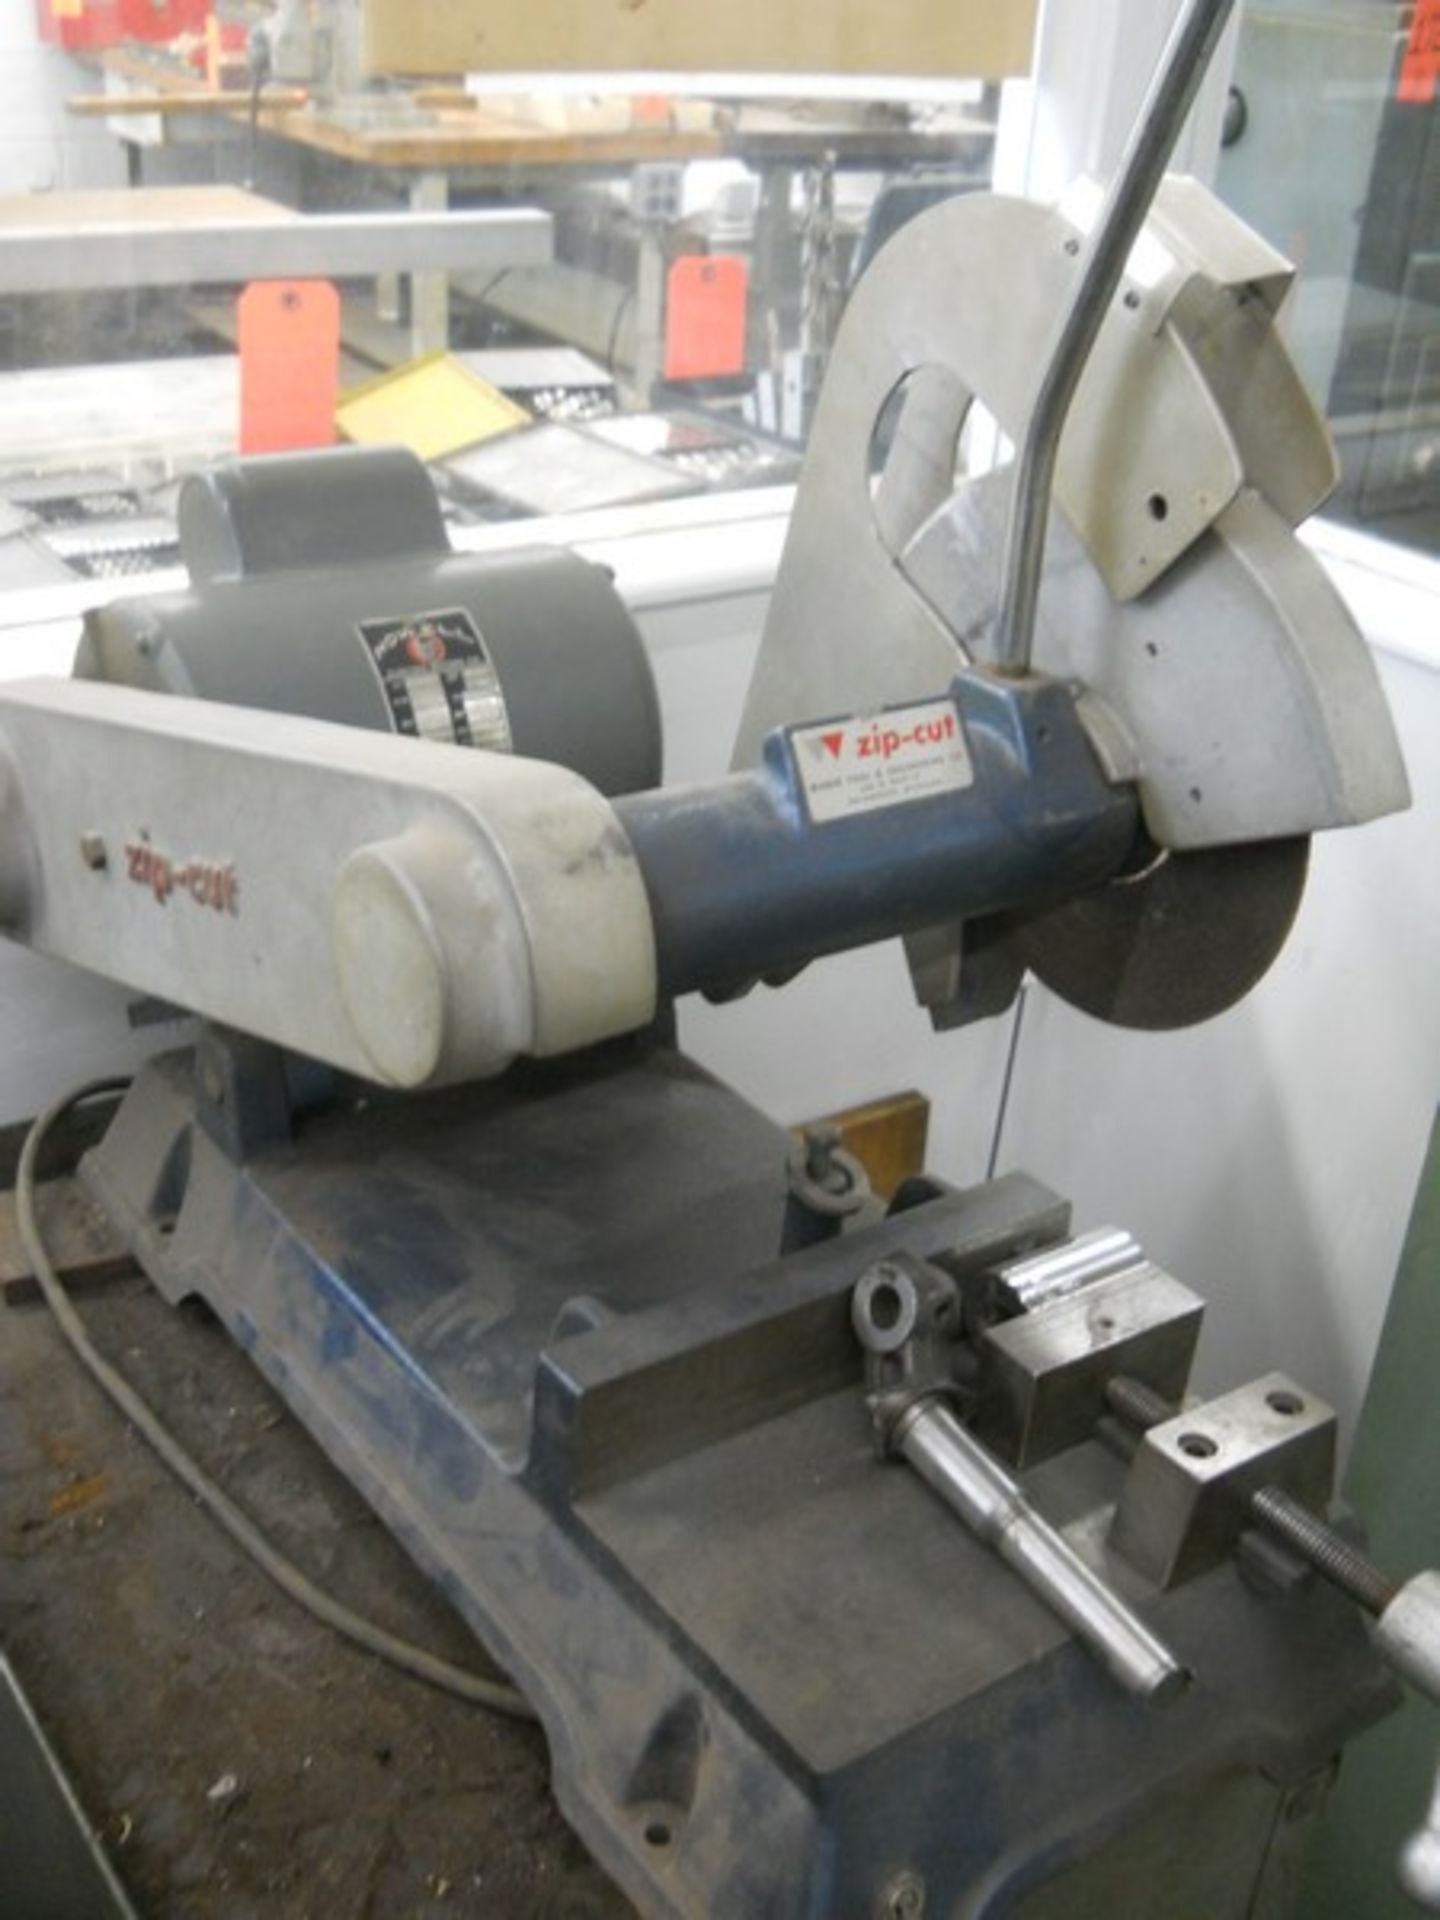 Waber 7 in. Zip-Cut Bench-Top Abrasive Cut-Off Saw; with 8: Blade Diameter; 1-HP; Rolling Base - Image 4 of 4